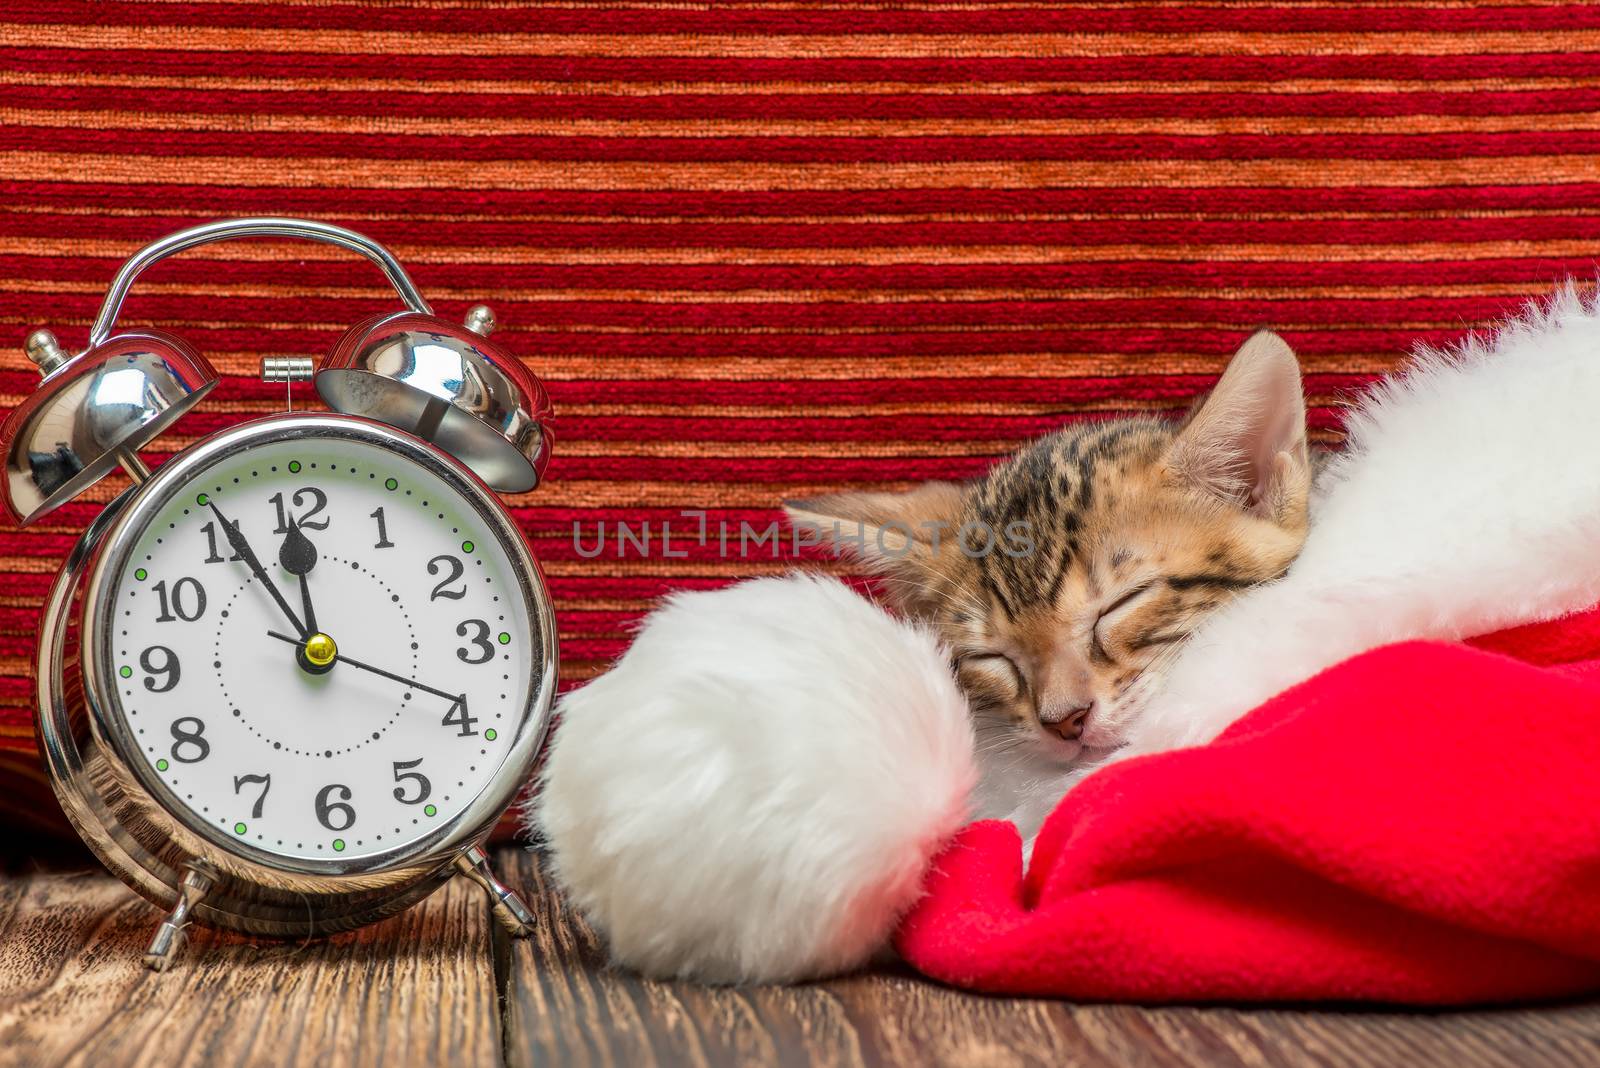 concept photo meeting of the new year, the kitten sleeps in Sant by kosmsos111